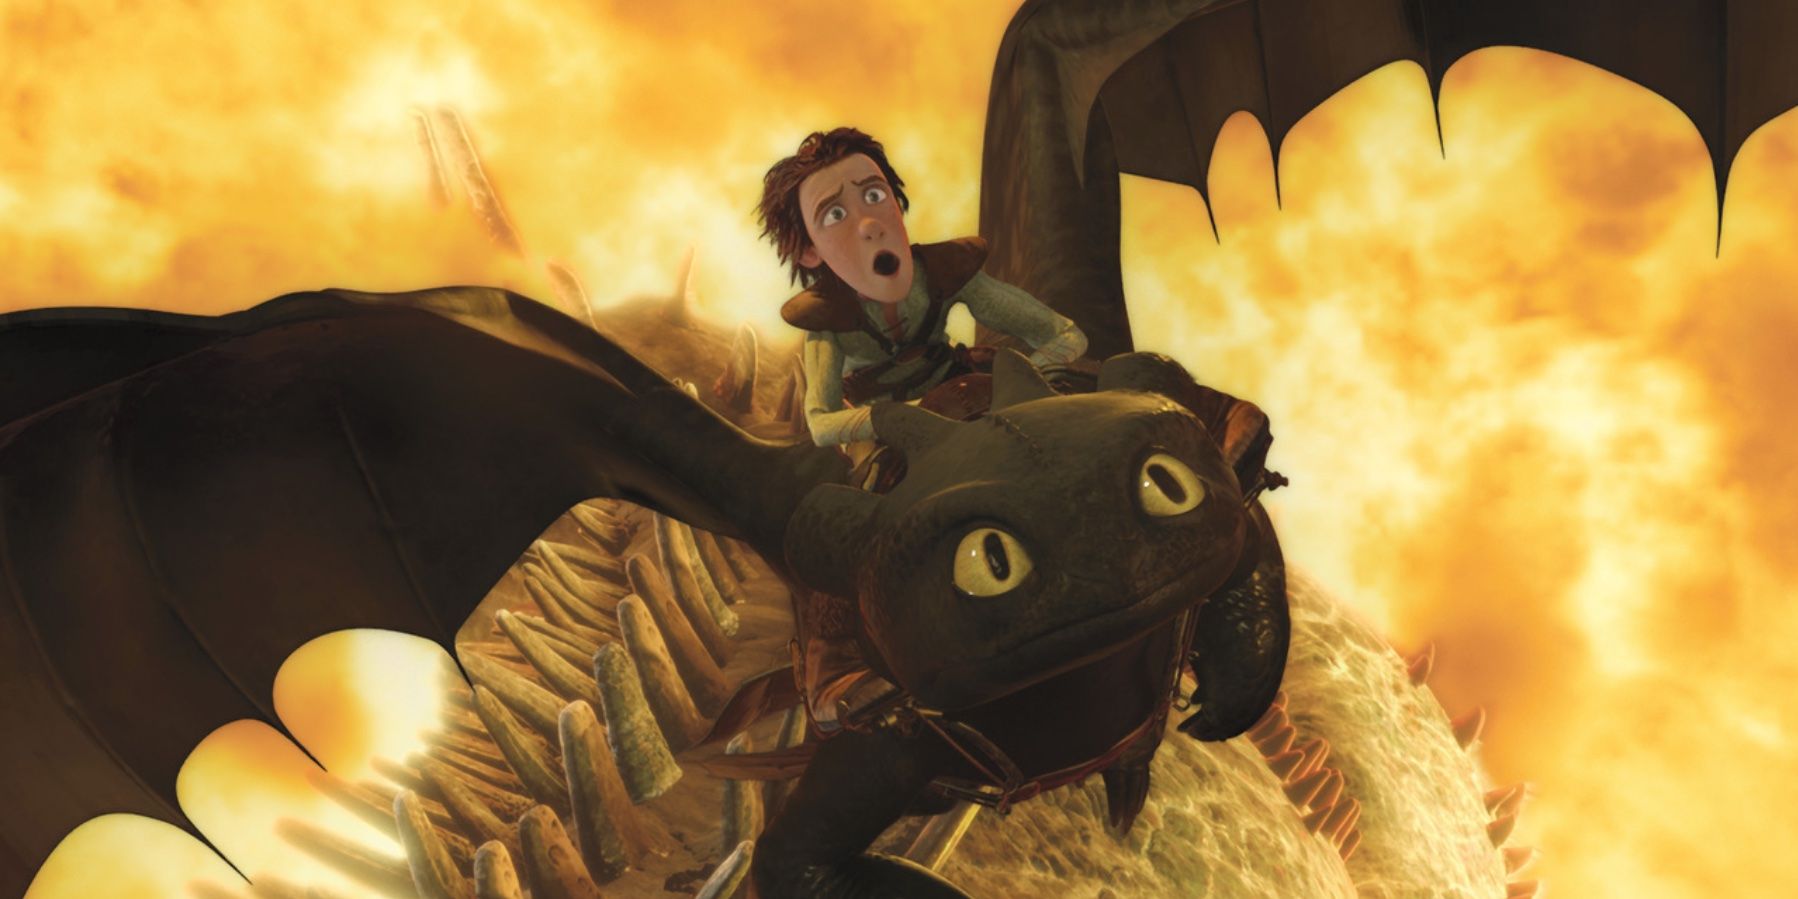 Jay Baruchel in 'How To Train Your Dragon'